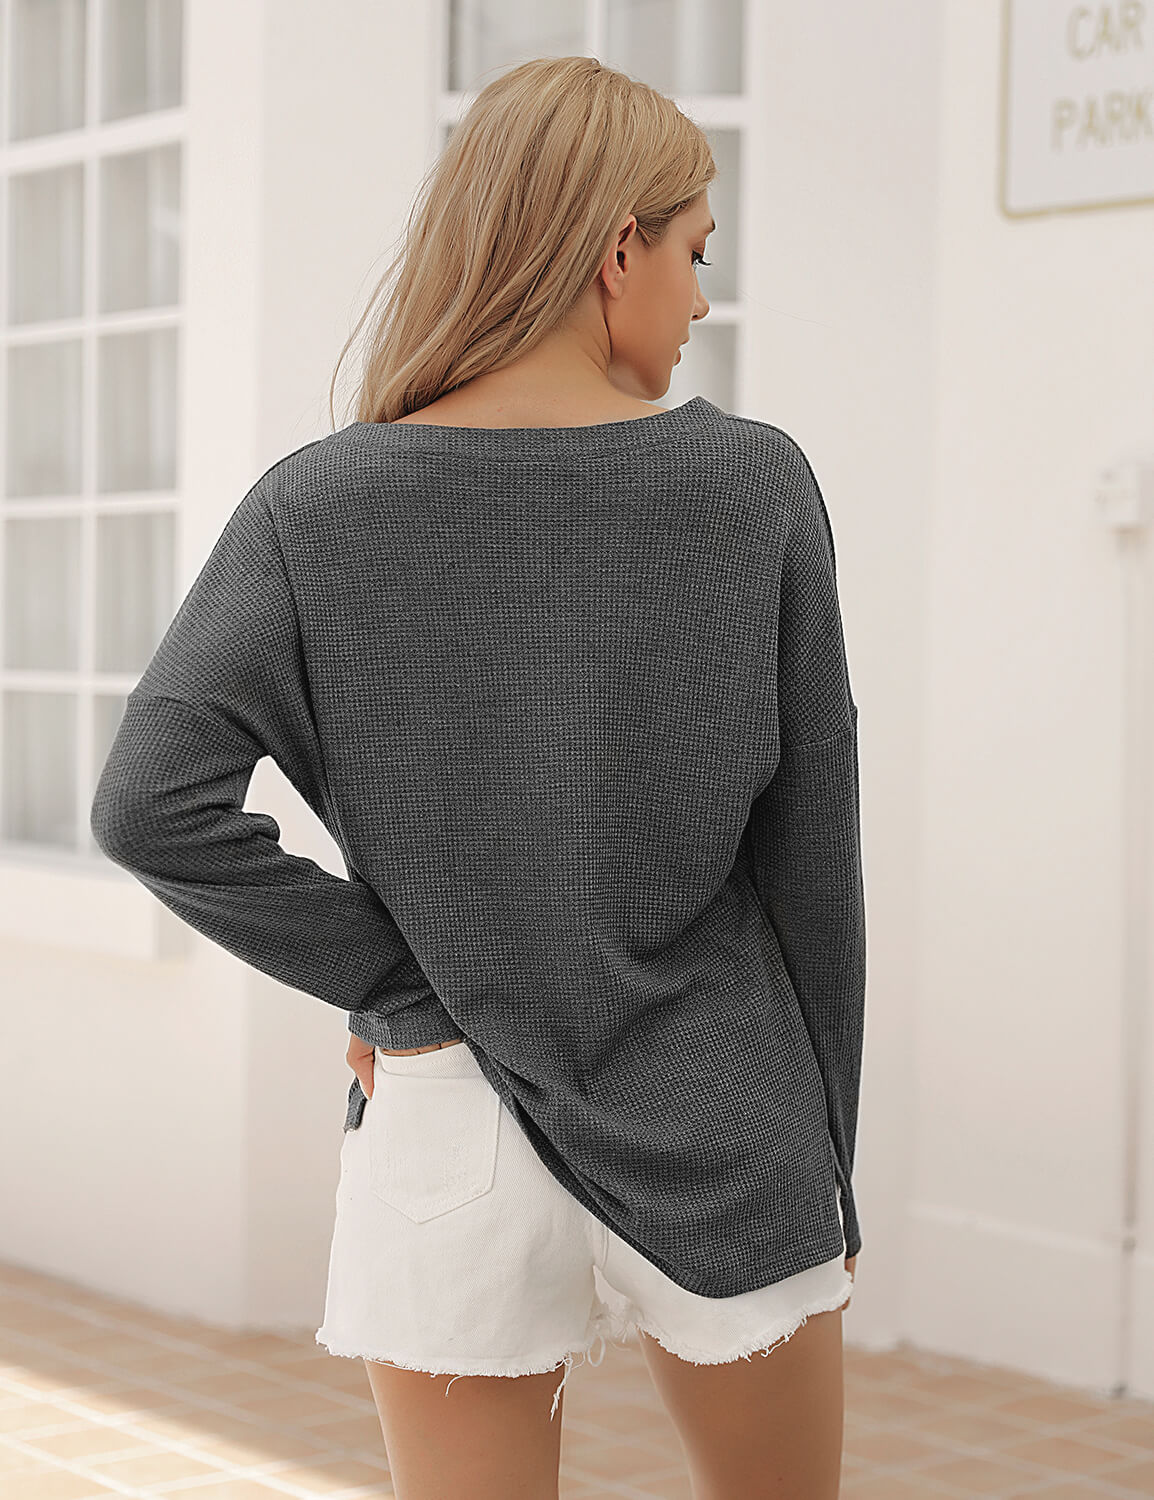 Blooming Jelly_Casual Knitted Long Sleeve Pocket T-Shirt_Gray_152694_07_2020 Women Autumn Wear Fashion_Tops_T-Shirt